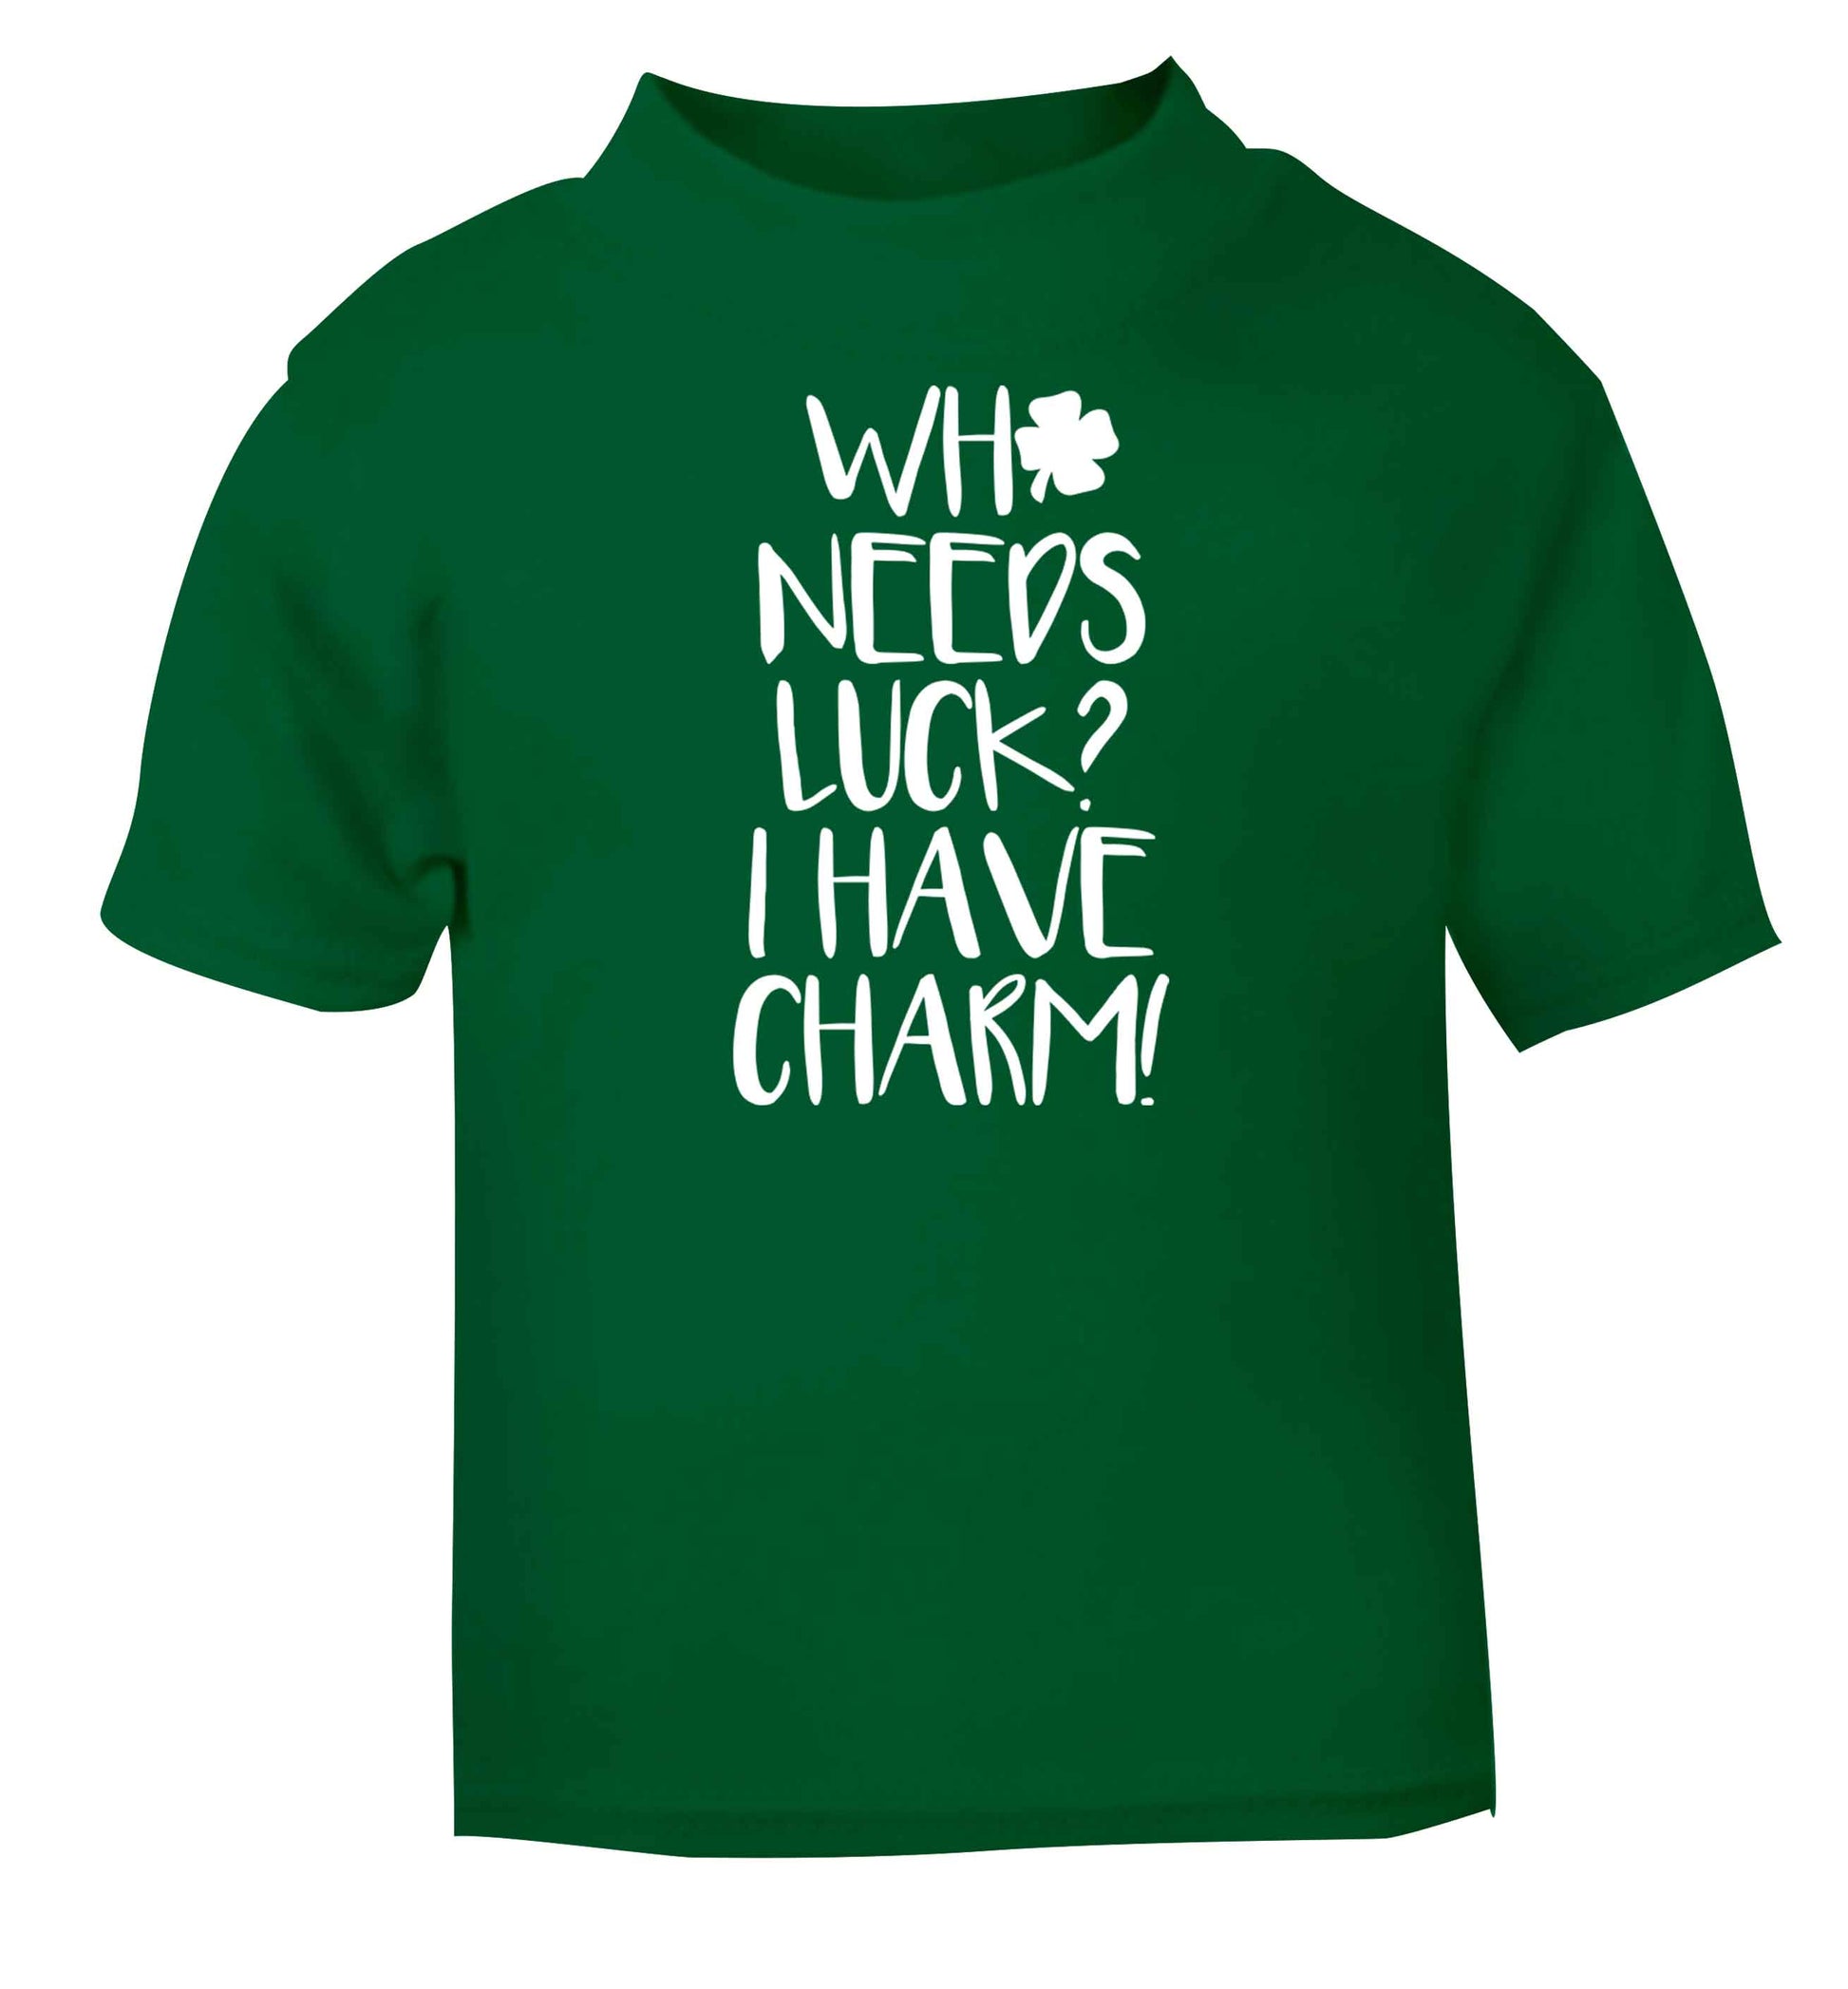 Who needs luck? I have charm! green baby toddler Tshirt 2 Years